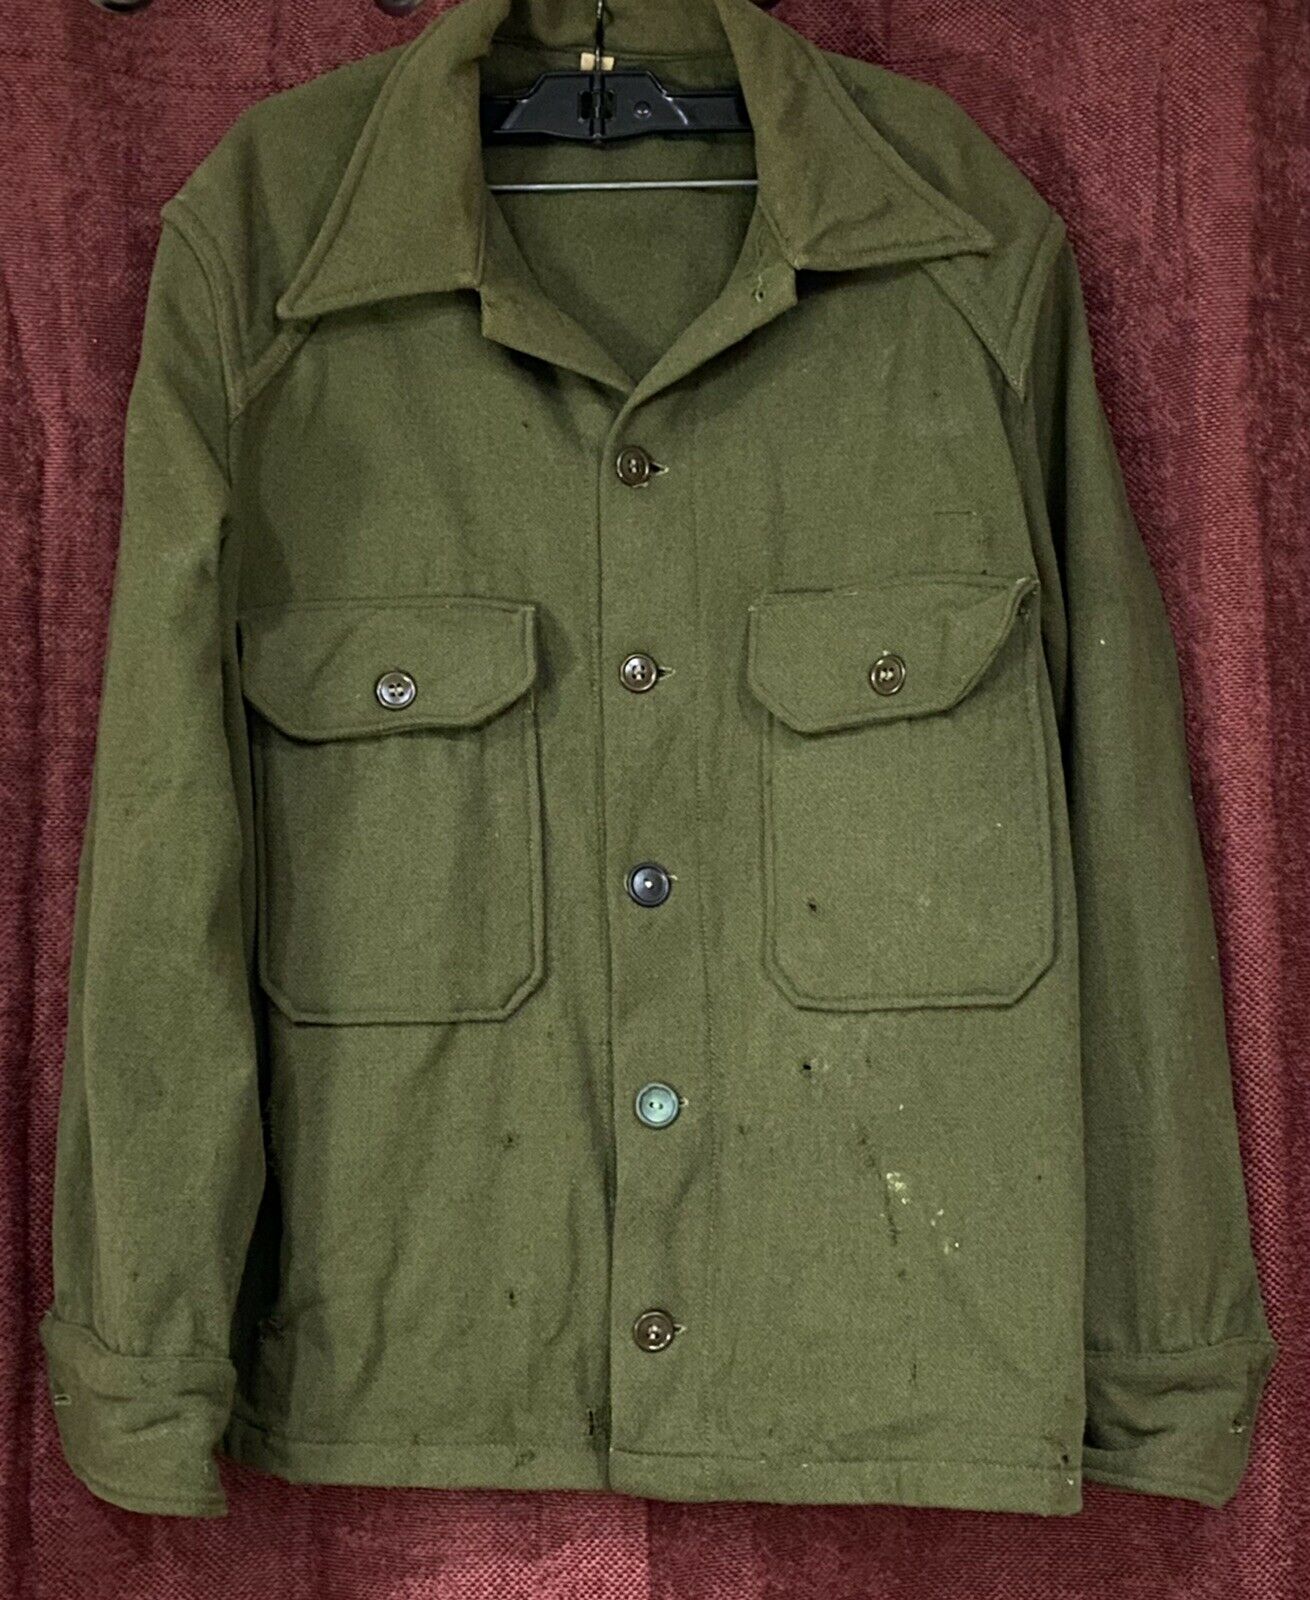 Vintage Wwii American Military Green Wool Army Uniform Blouse Long Sleeve Shirt